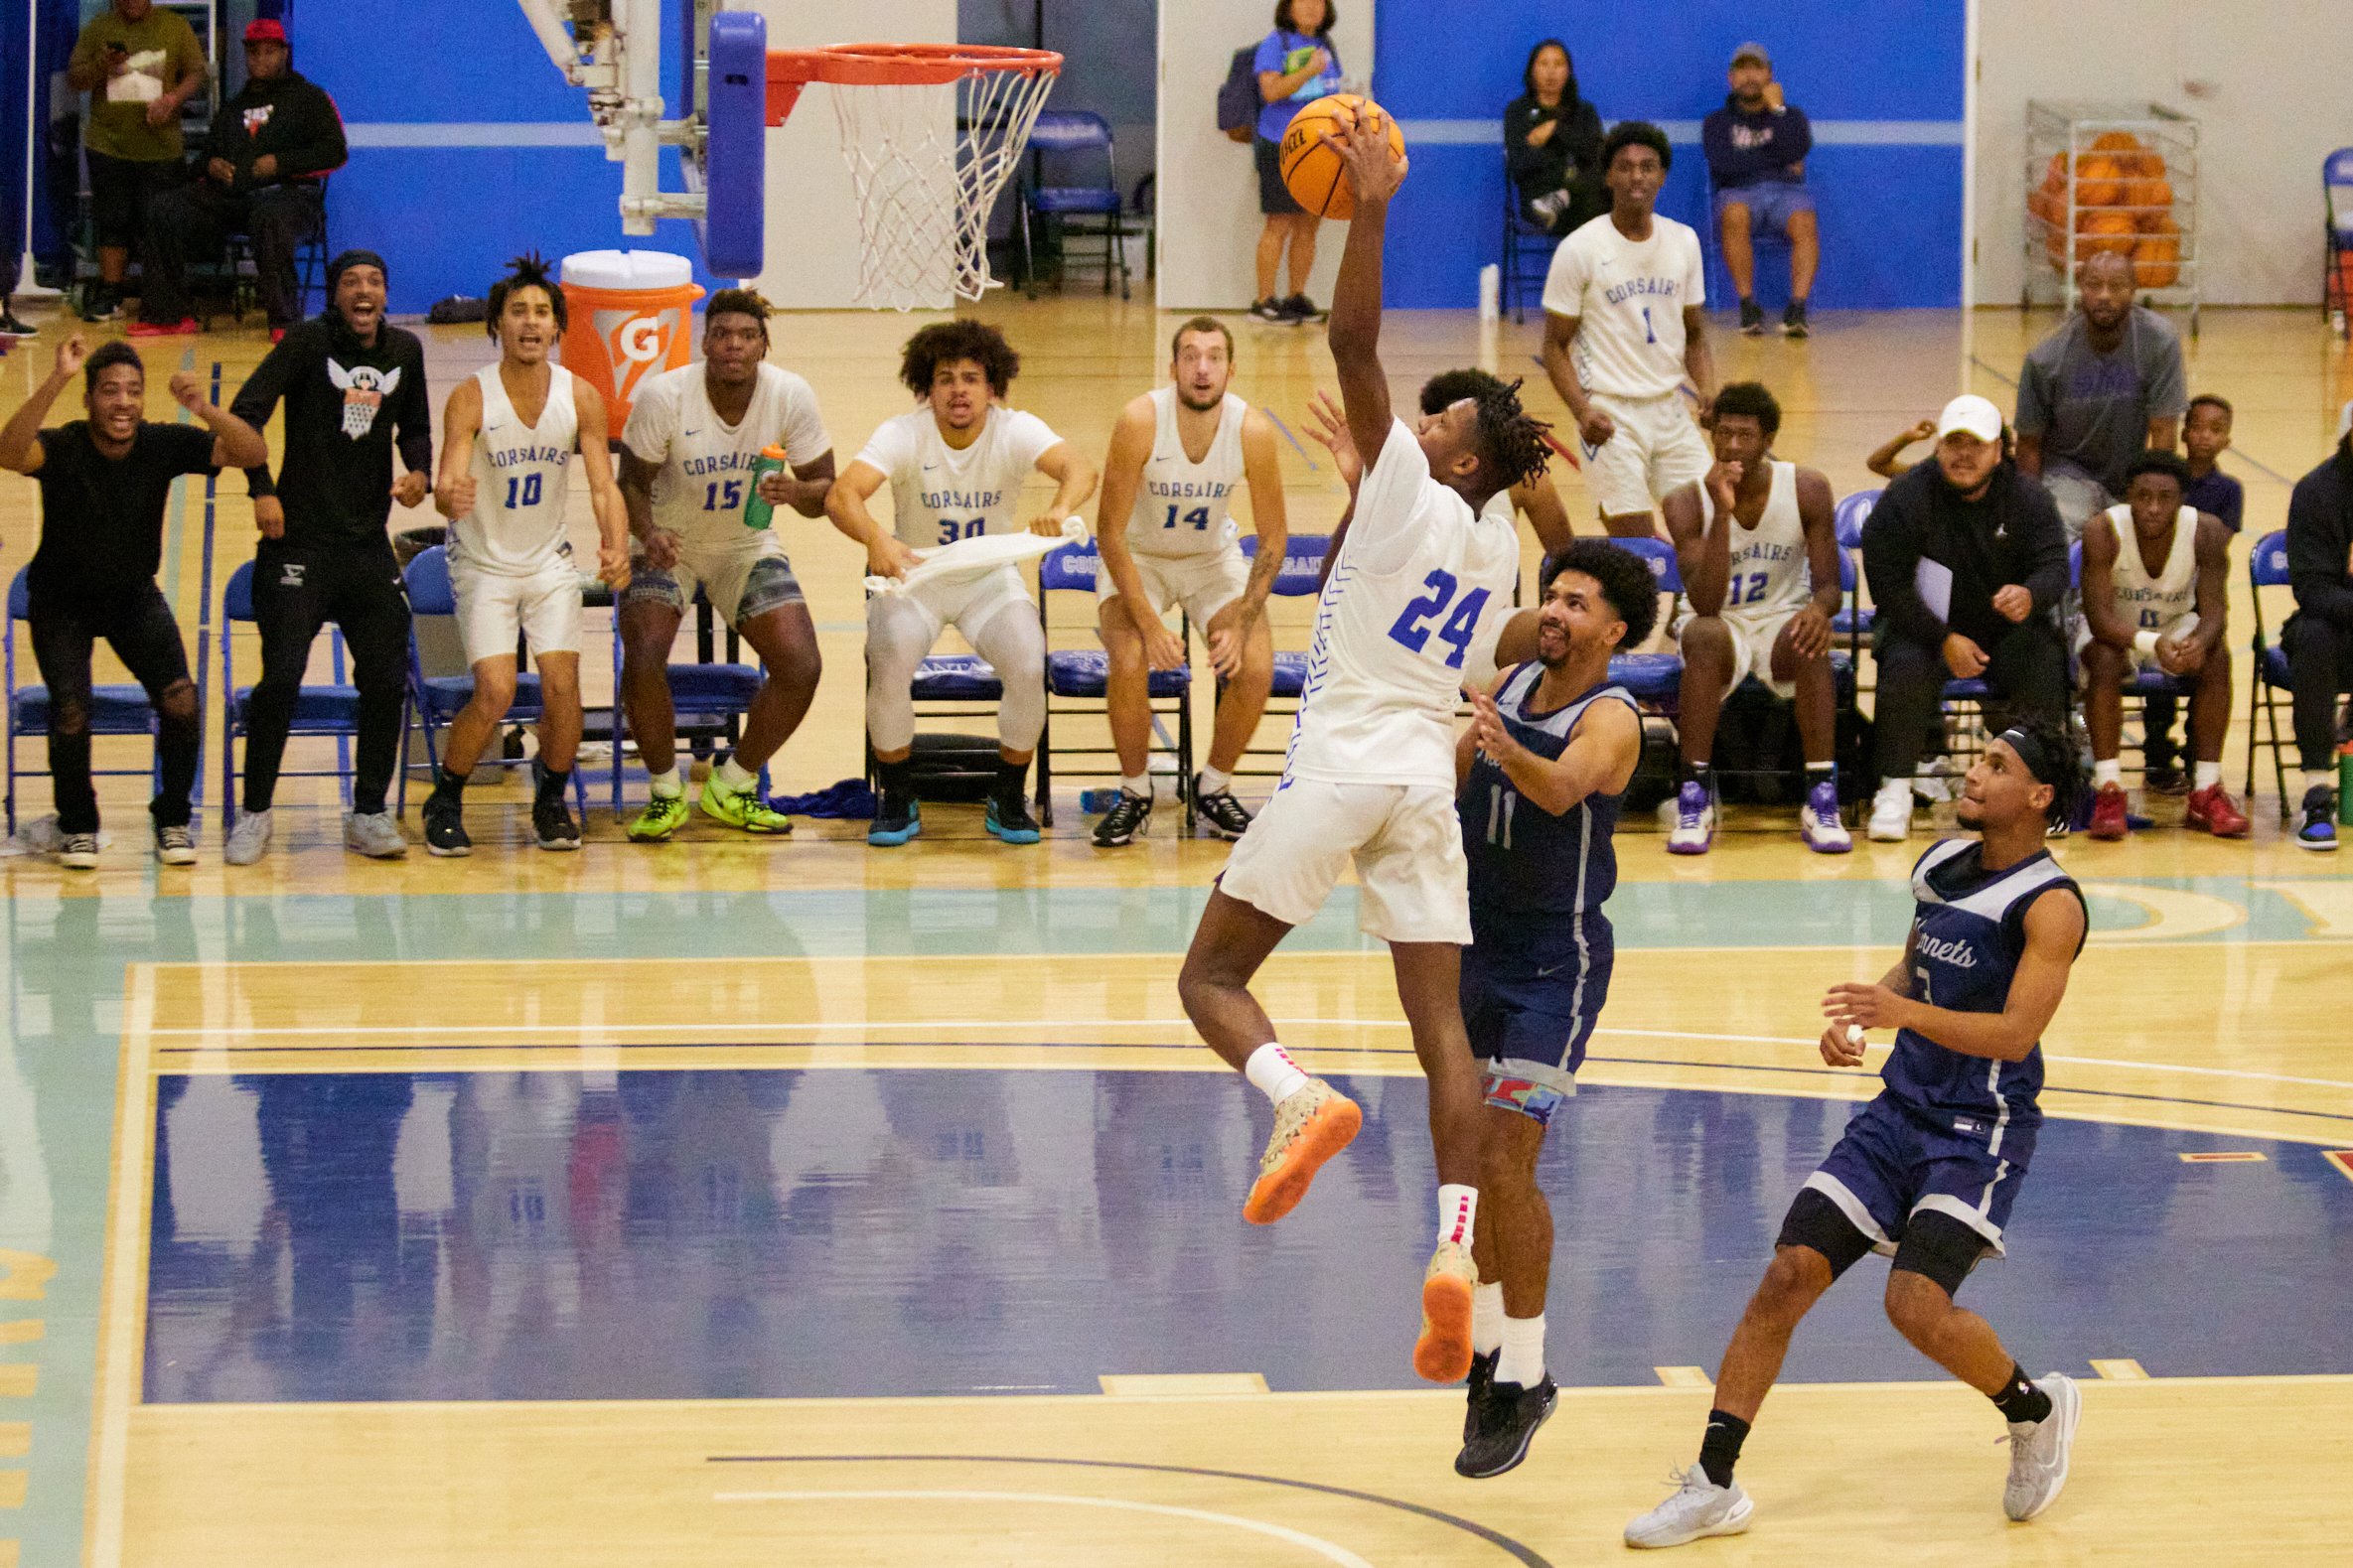  Santa Monica College Corsairs Point Guard Mike Hill performing a slam dunk after running across the field during the men's basketball match against Fullerton College Hornets at Corsair Gym, Santa Monica, Calif., on Oct 24, 2023. The Corsairs lost 76